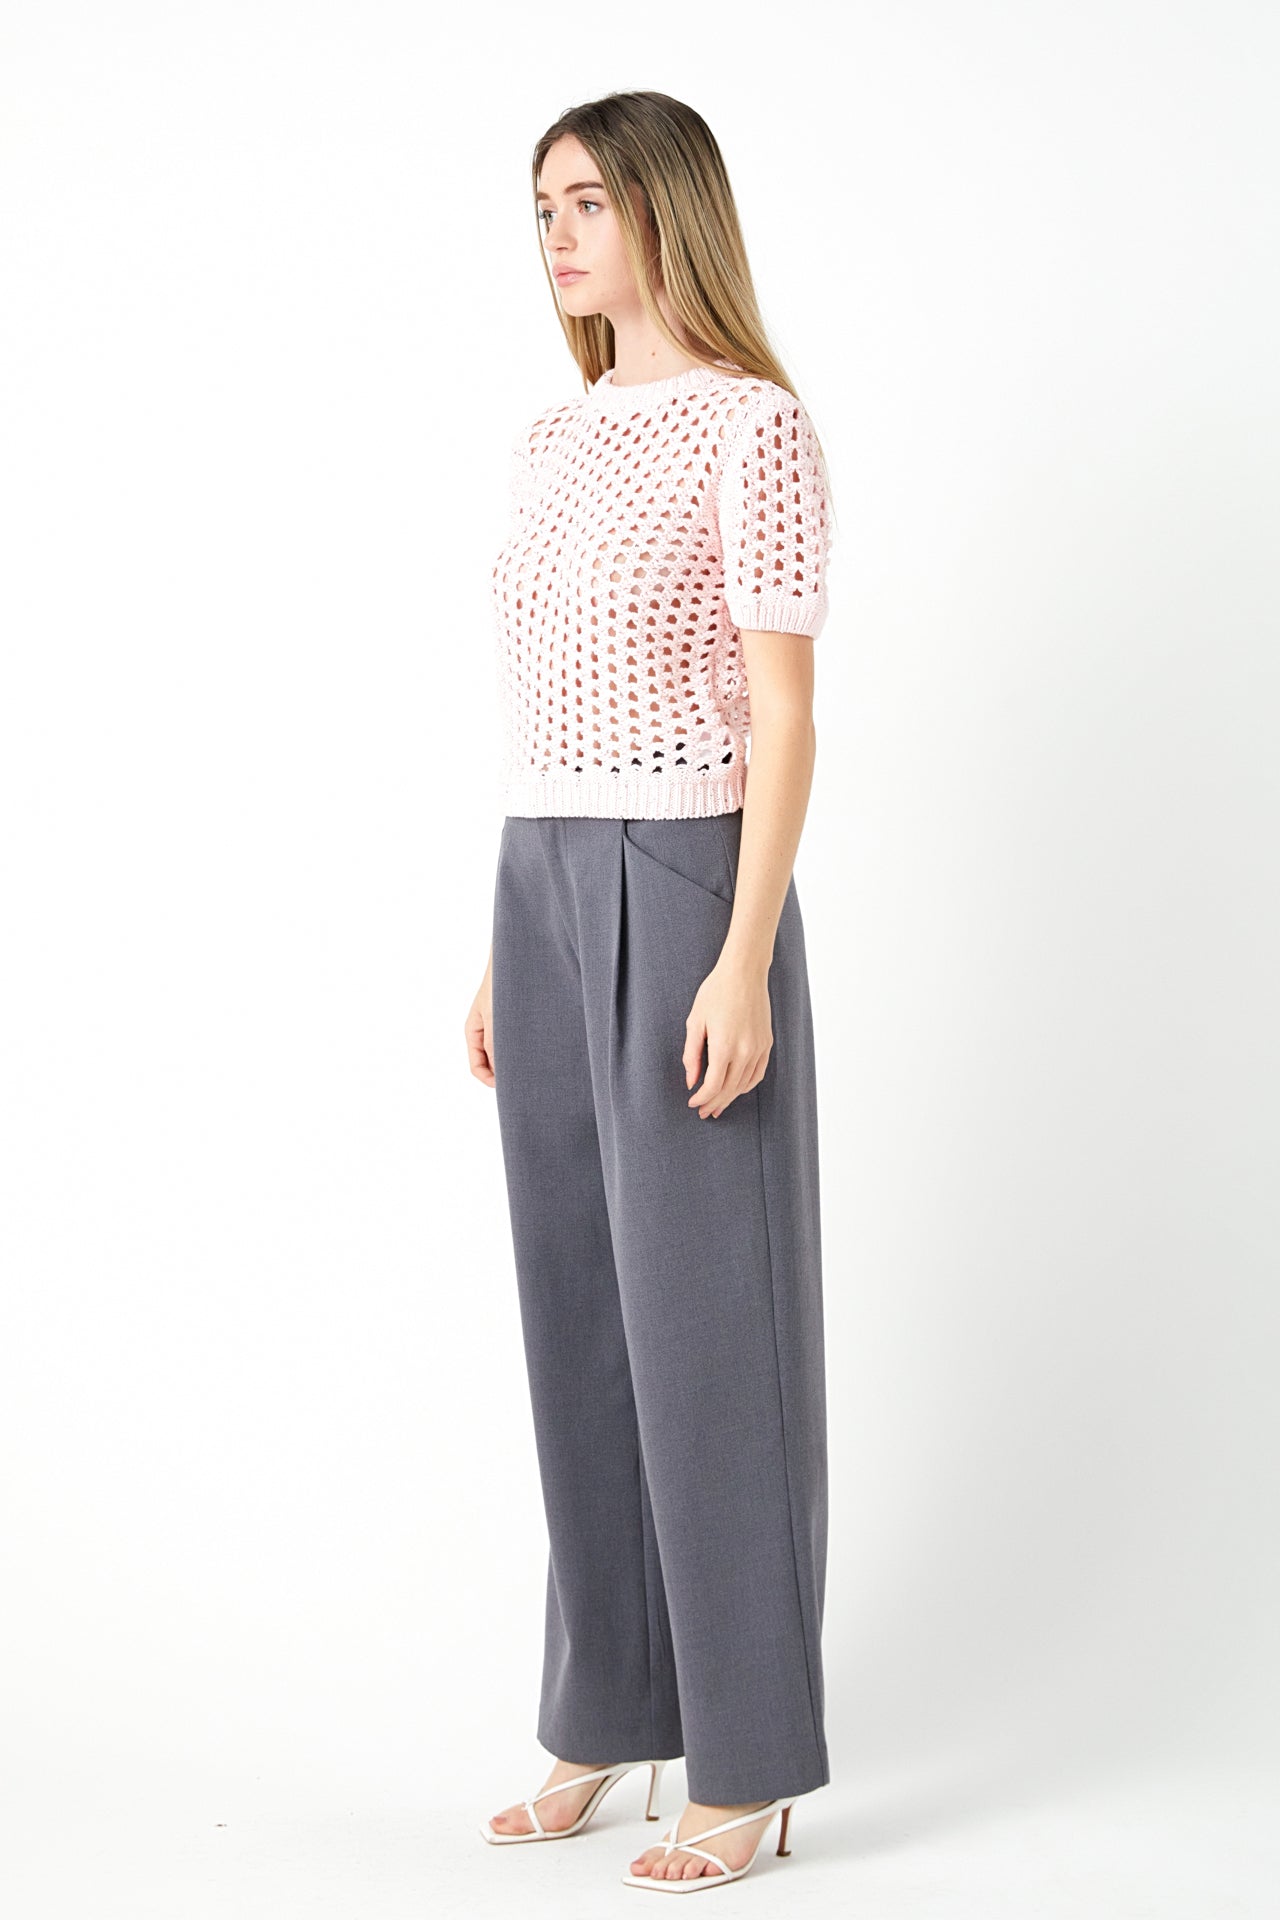 ENDLESS ROSE - Sequins Knit Top - TOPS available at Objectrare